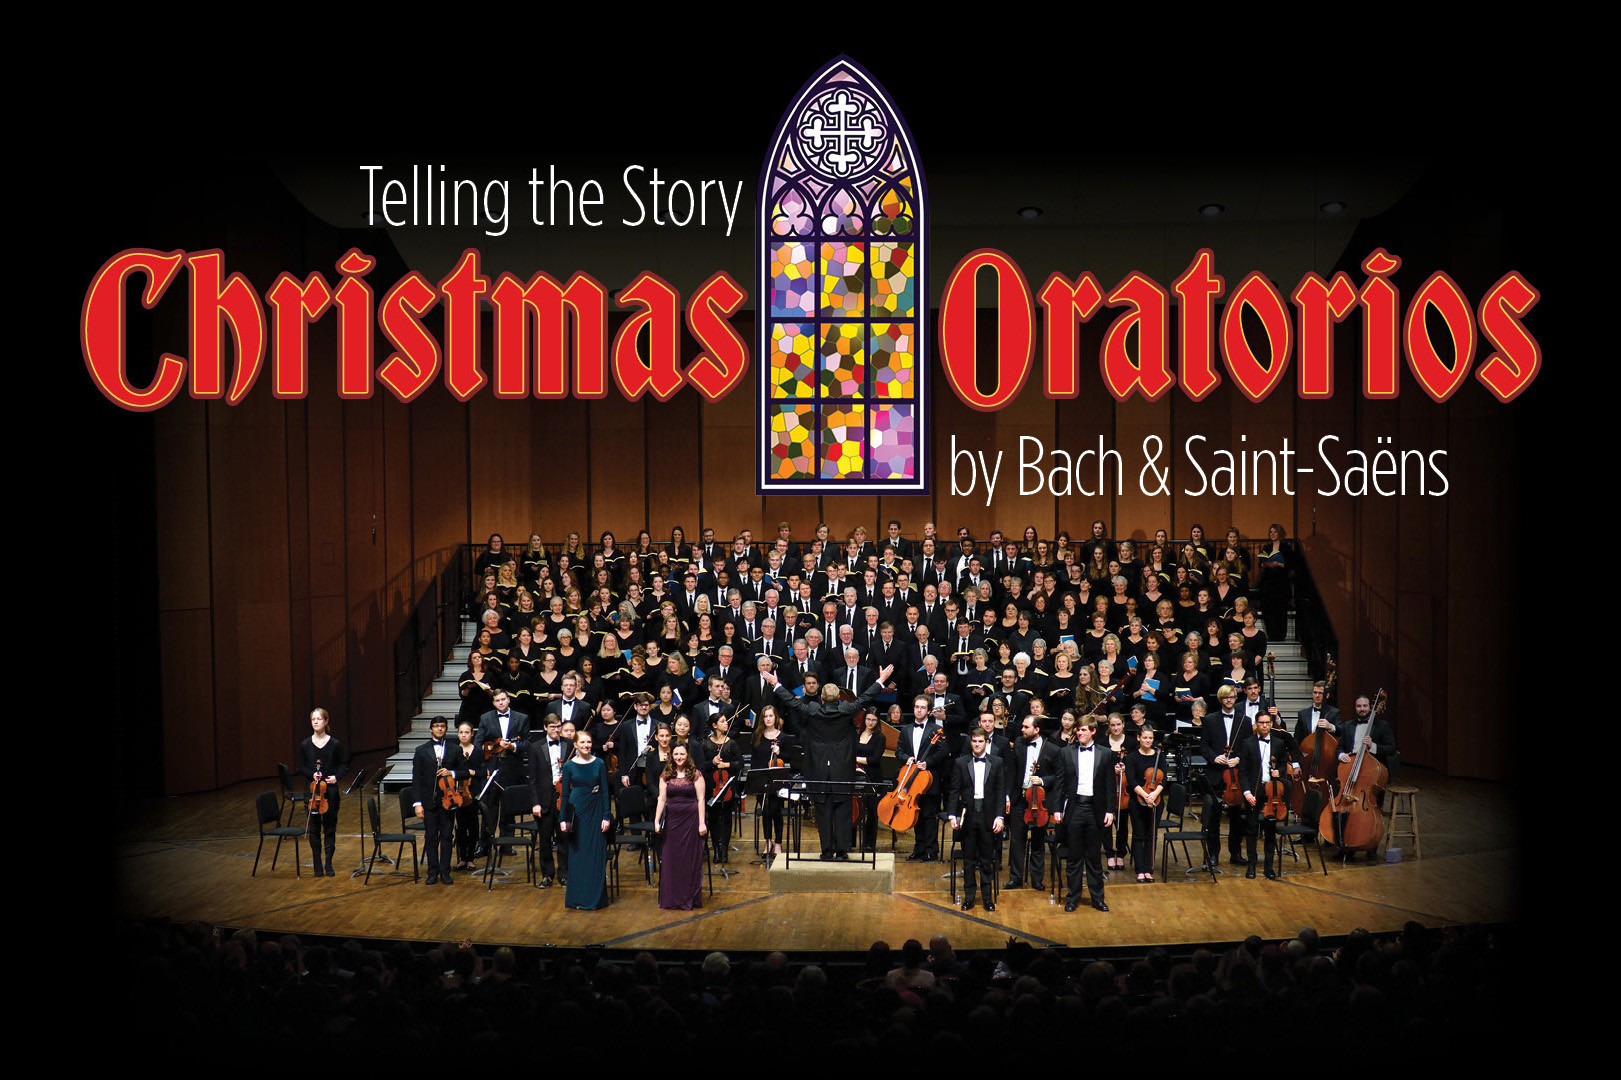 A symphony orchestra on stage at the Wharton Center with the text: Telling the Story Christmas Oratorios by Bach & Saint-Saens, MSU Federal Credit Union Showcase Series